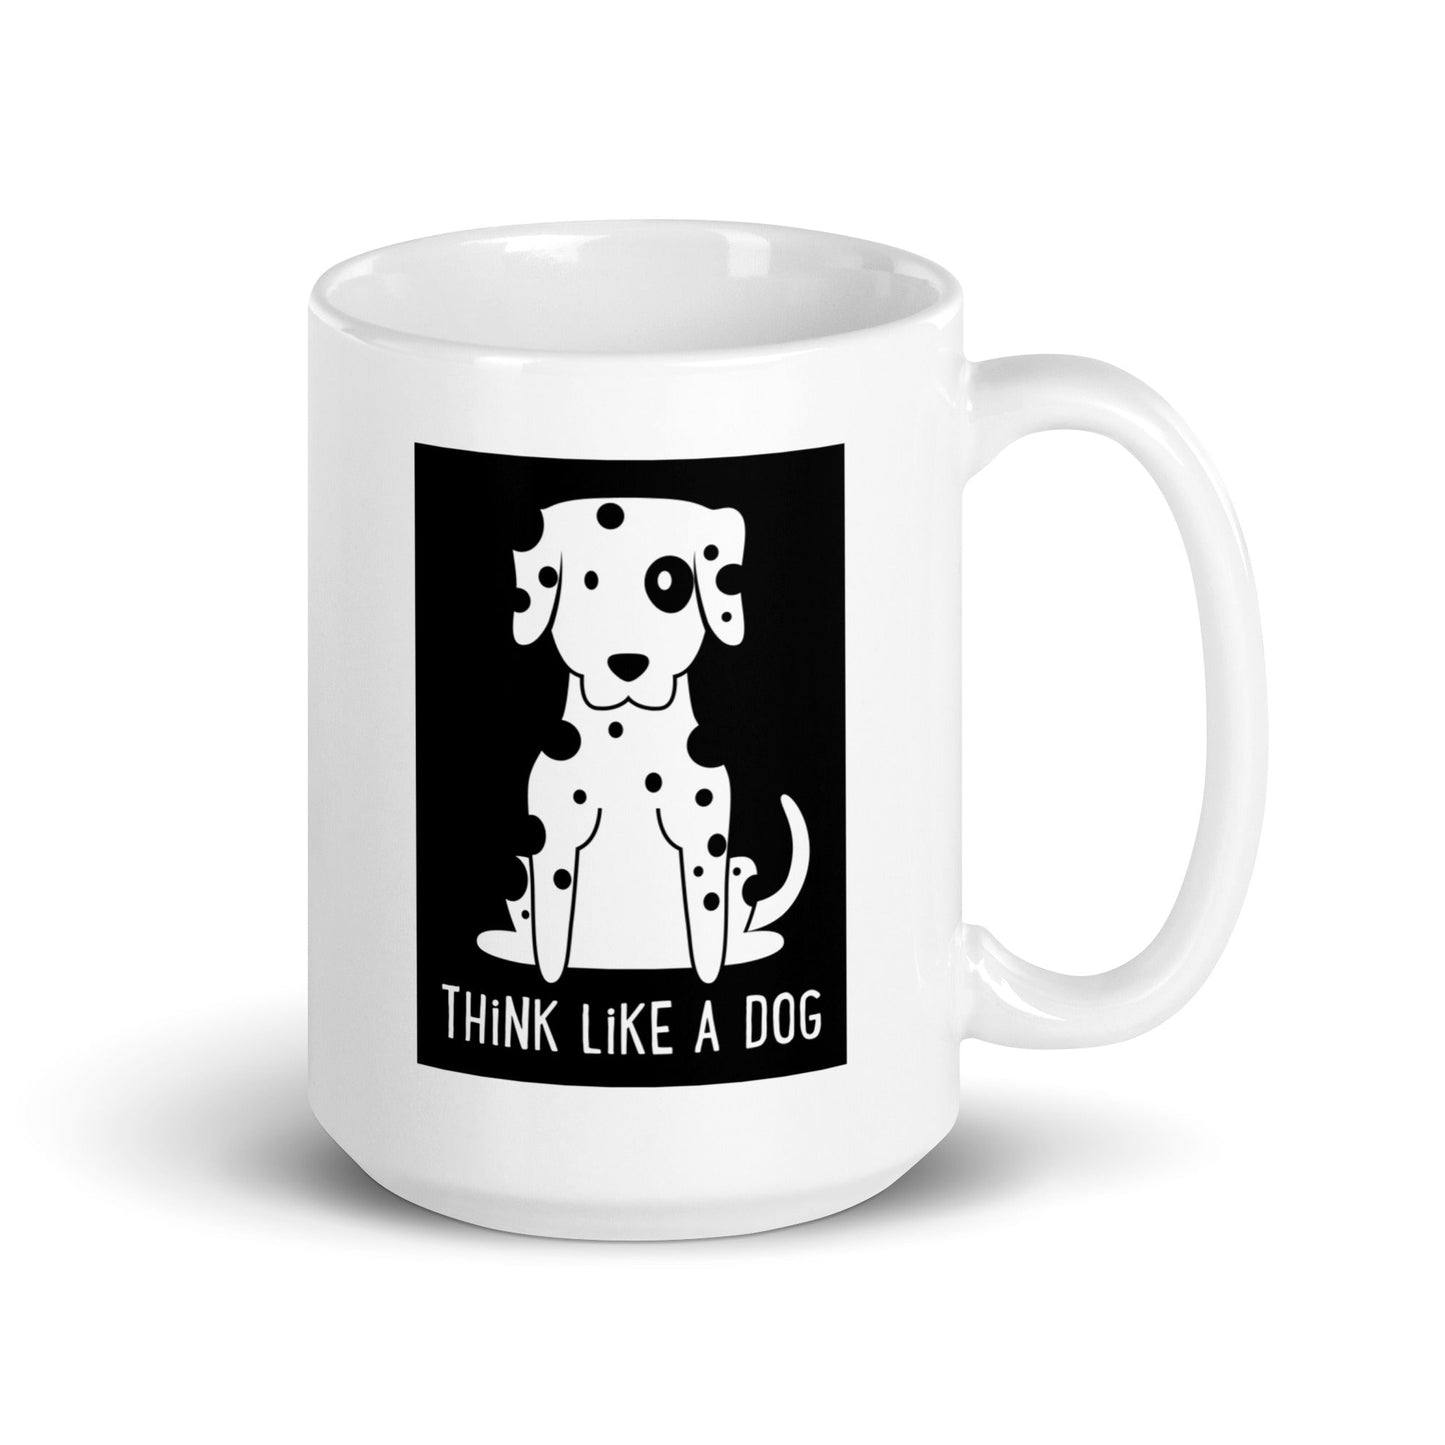 White Glossy Mug Spot Black & White with a black and white illustration of a dalmatian and the phrase "THiNK LiKE A DOG®" on its side.